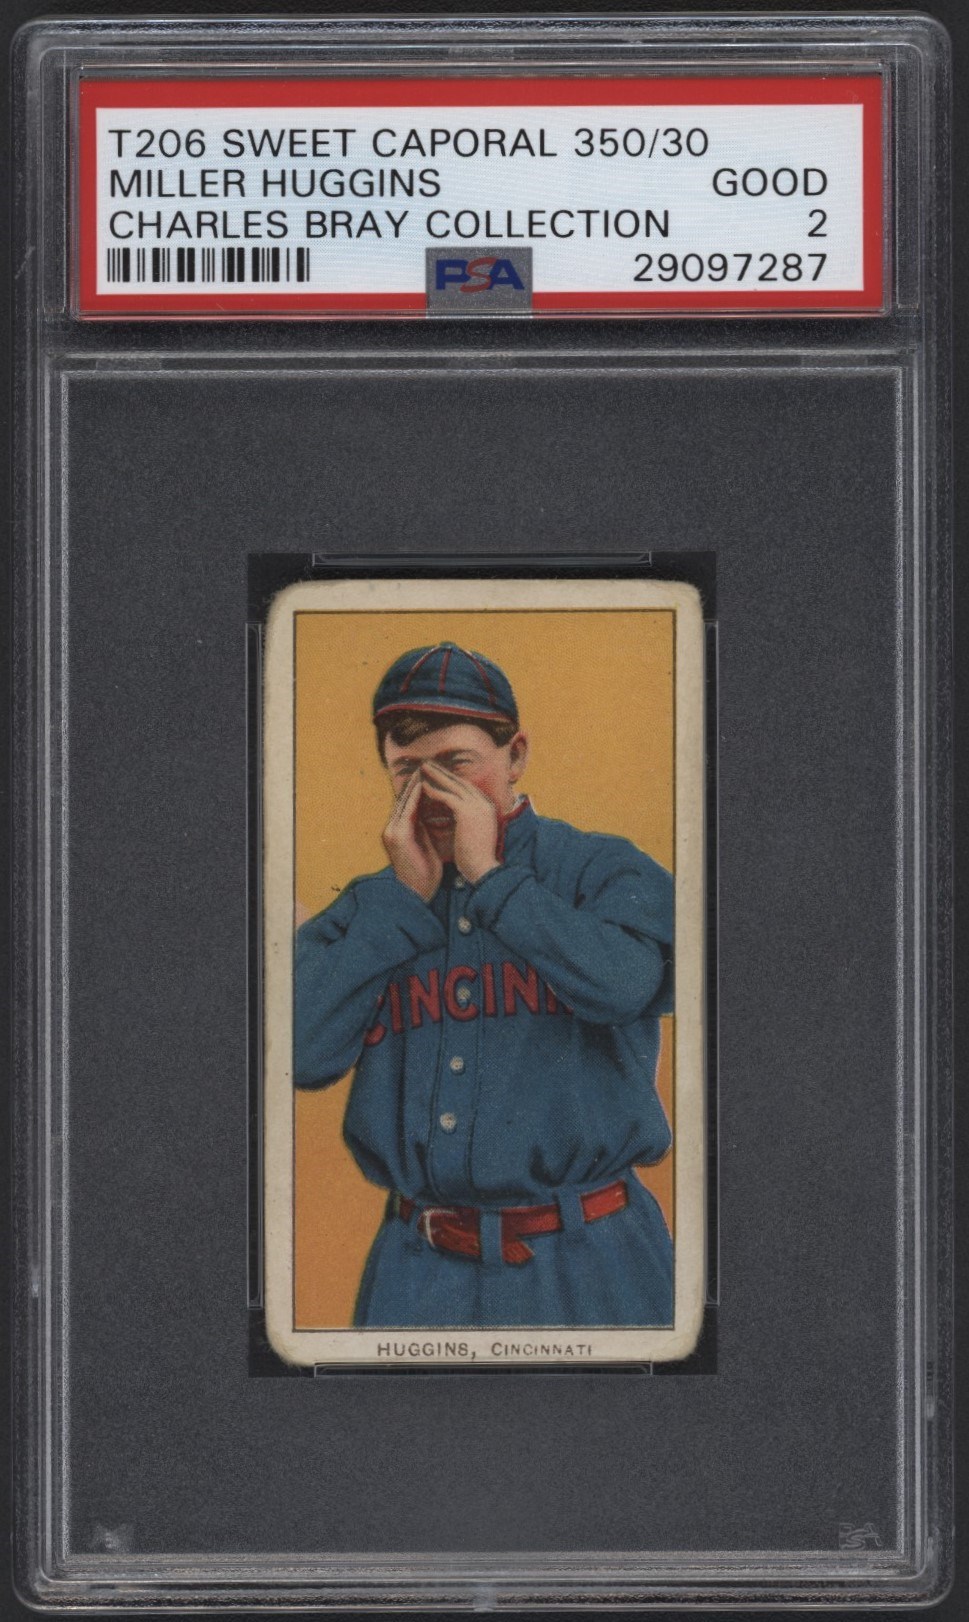 T206 Sweet Caporal 350/30 Miller Huggins PSA 2 From the Charles Bray Collection.